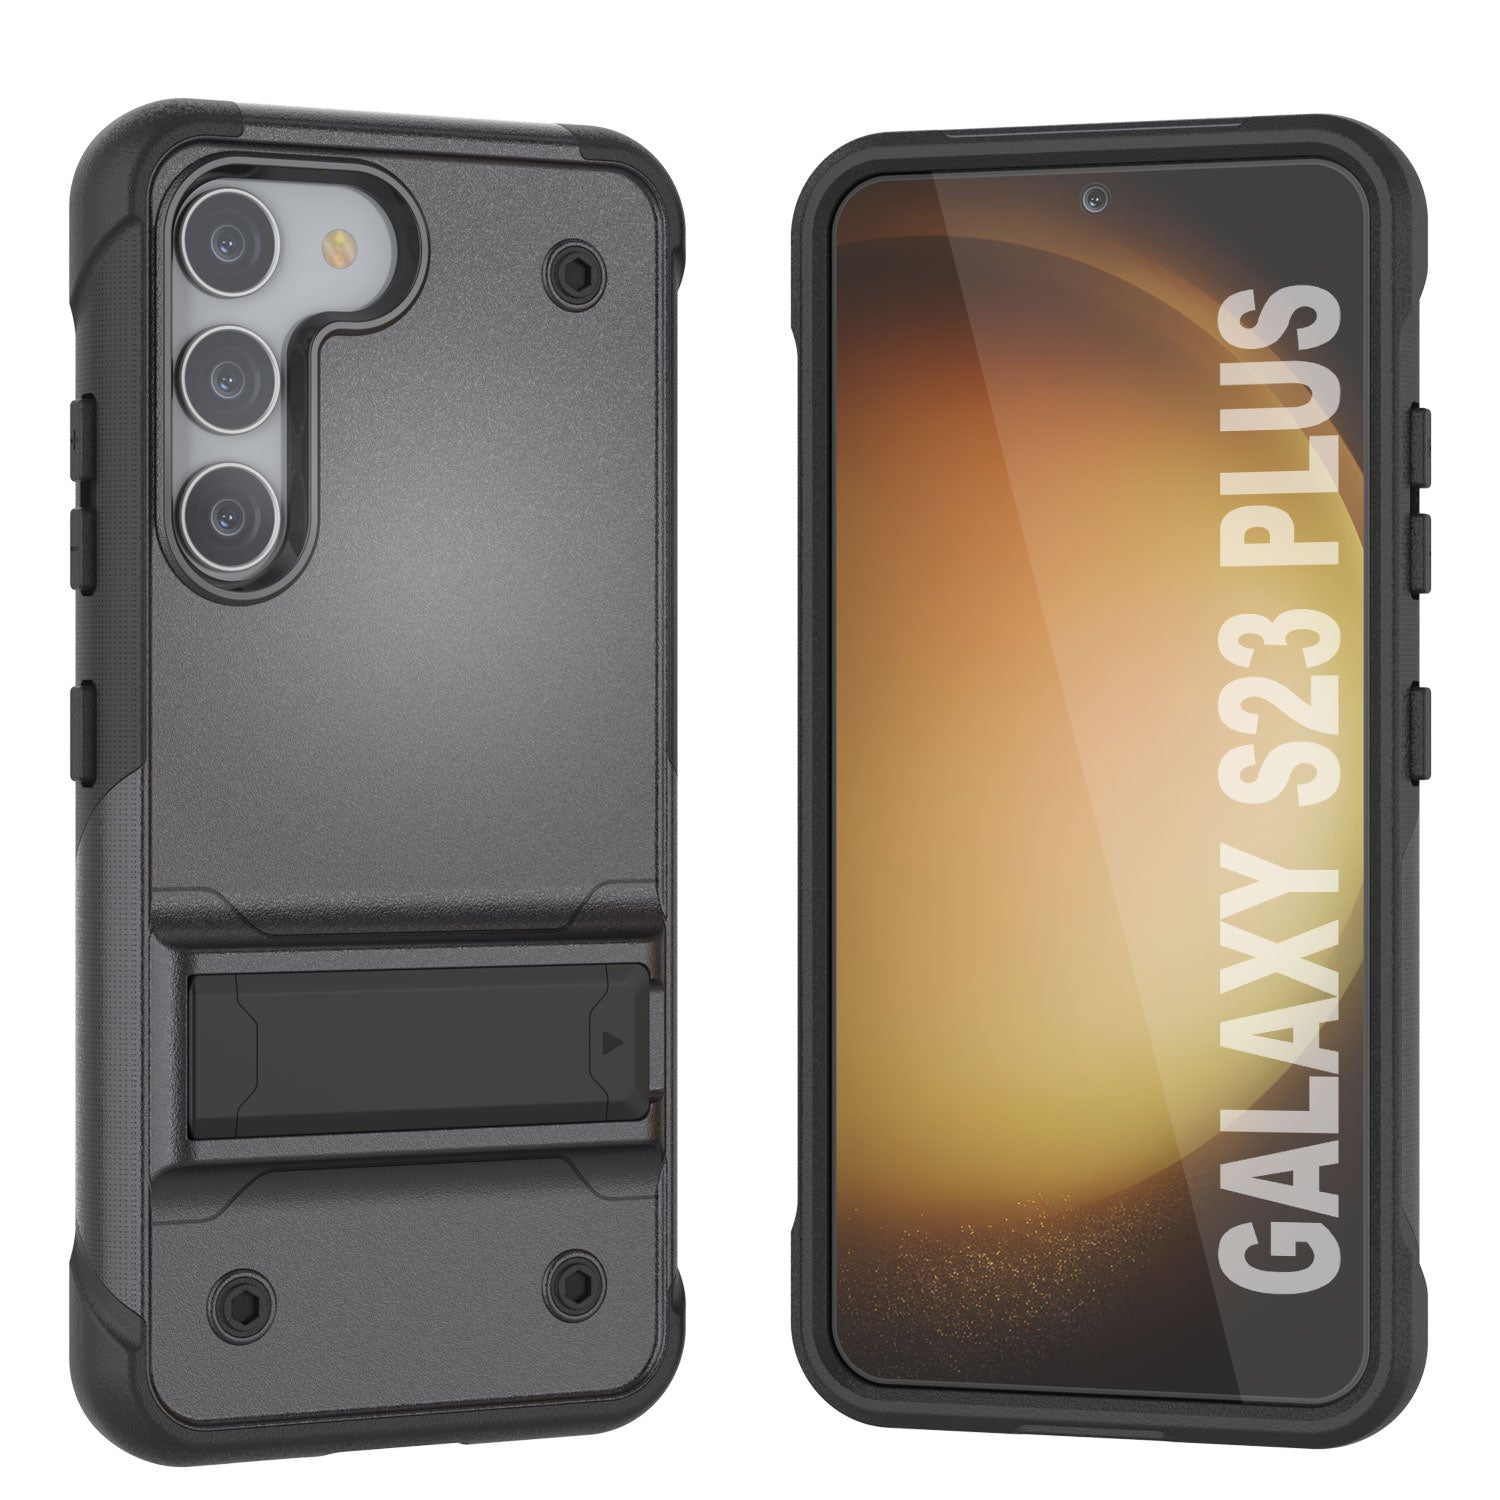 Punkcase Galaxy S23+ Plus Case [Reliance Series] Protective Hybrid Military Grade Cover W/Built-in Kickstand [grey-Black]